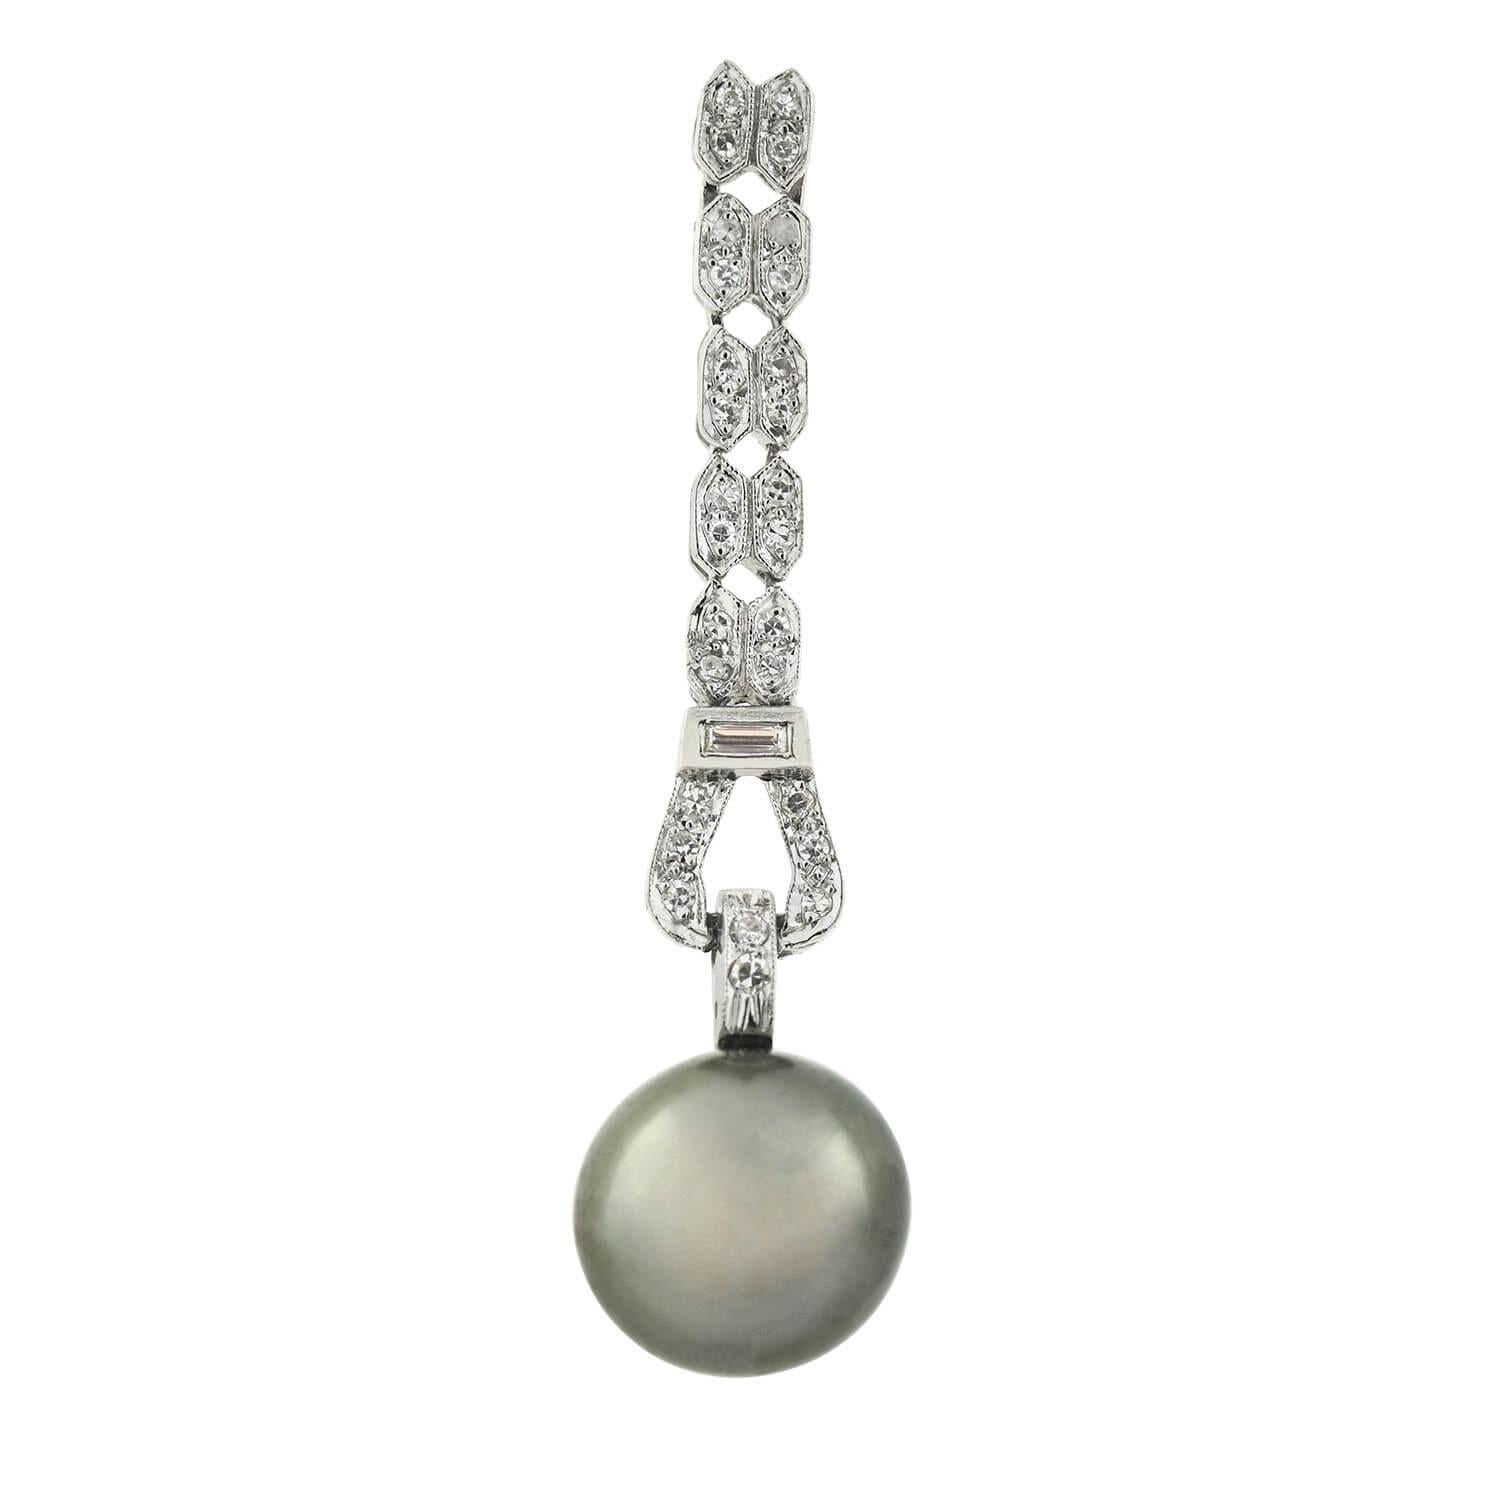 A stunning pair of diamond and black Tahitian pearl earrings from the Art Deco (ca1920s) era! Crafted in platinum, each earring adorns a single Tahitian South Sea pearl dangling at the base of an elegant drop design. The 11mm pearl exhibits a high